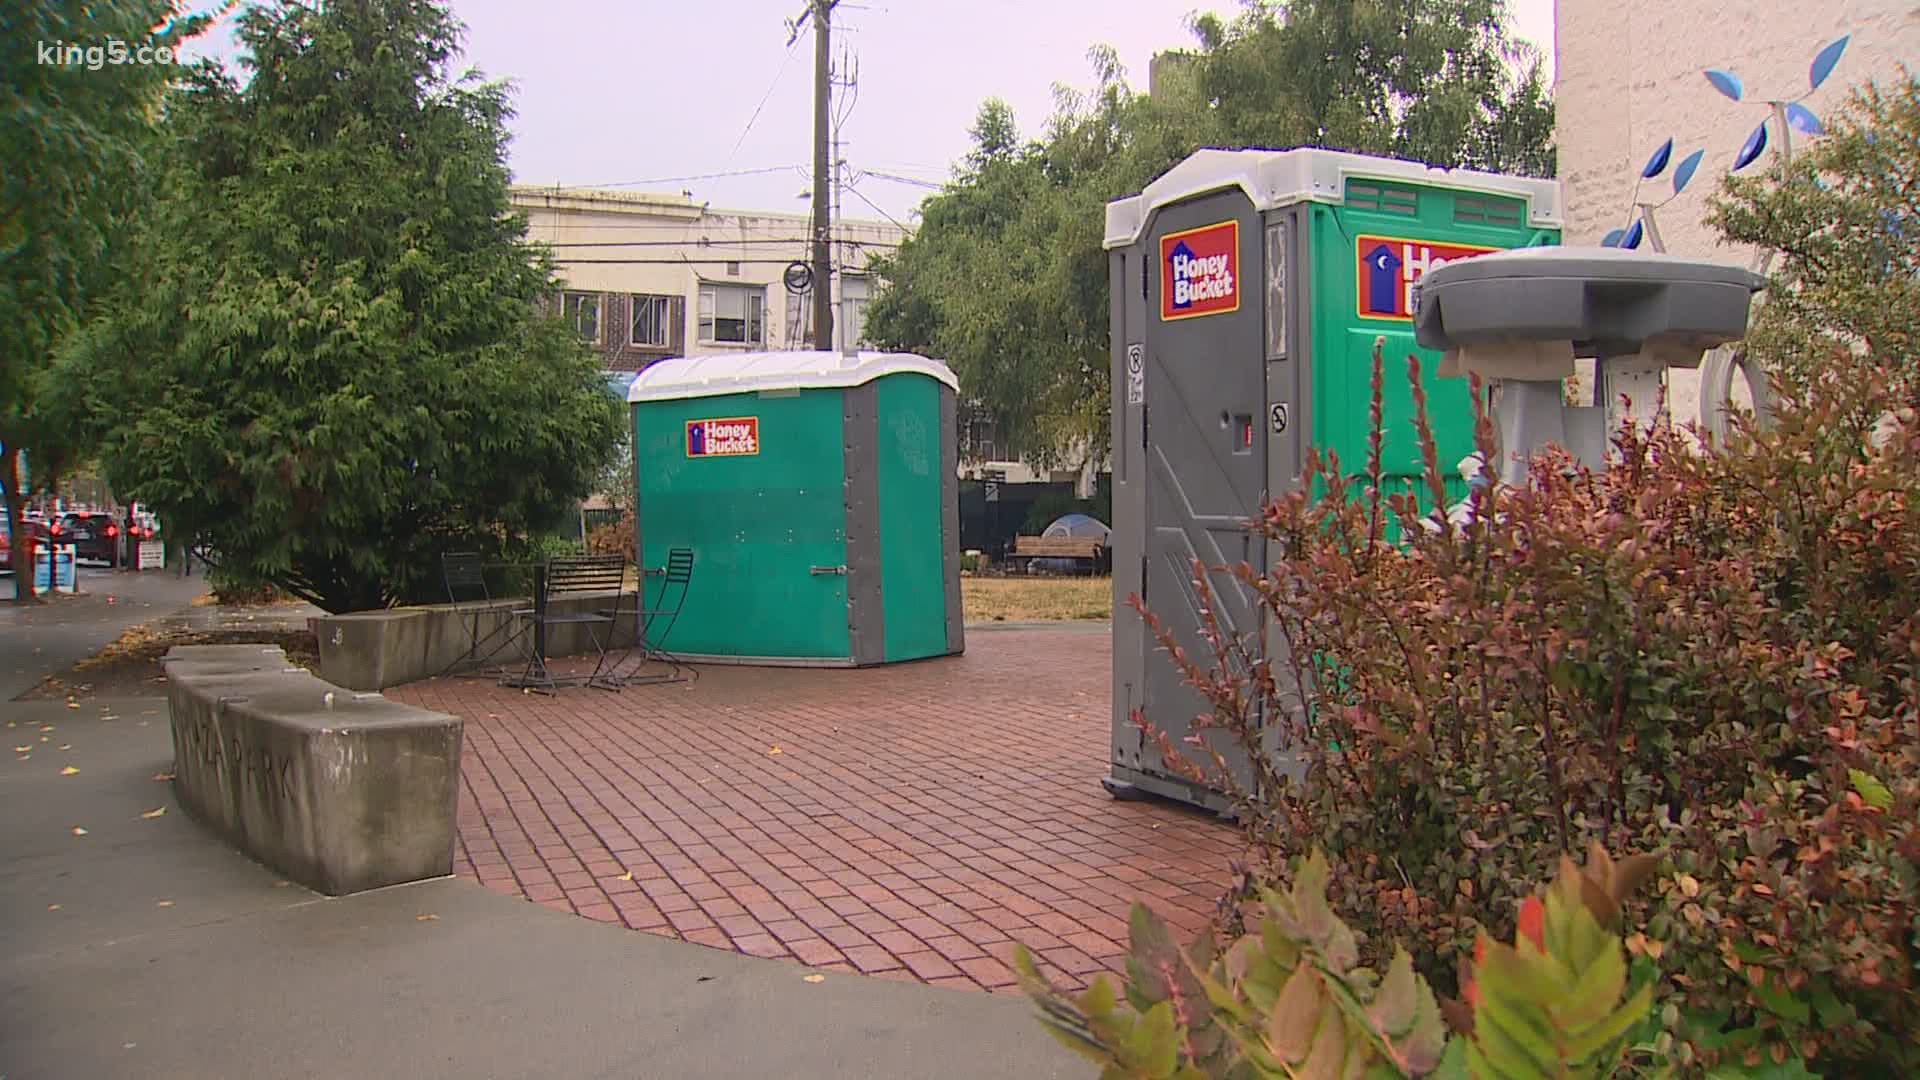 A hygiene station was put at the Junction Plaza Park in May to help people in need during the pandemic. But neighbors say the addition has led to more violence.